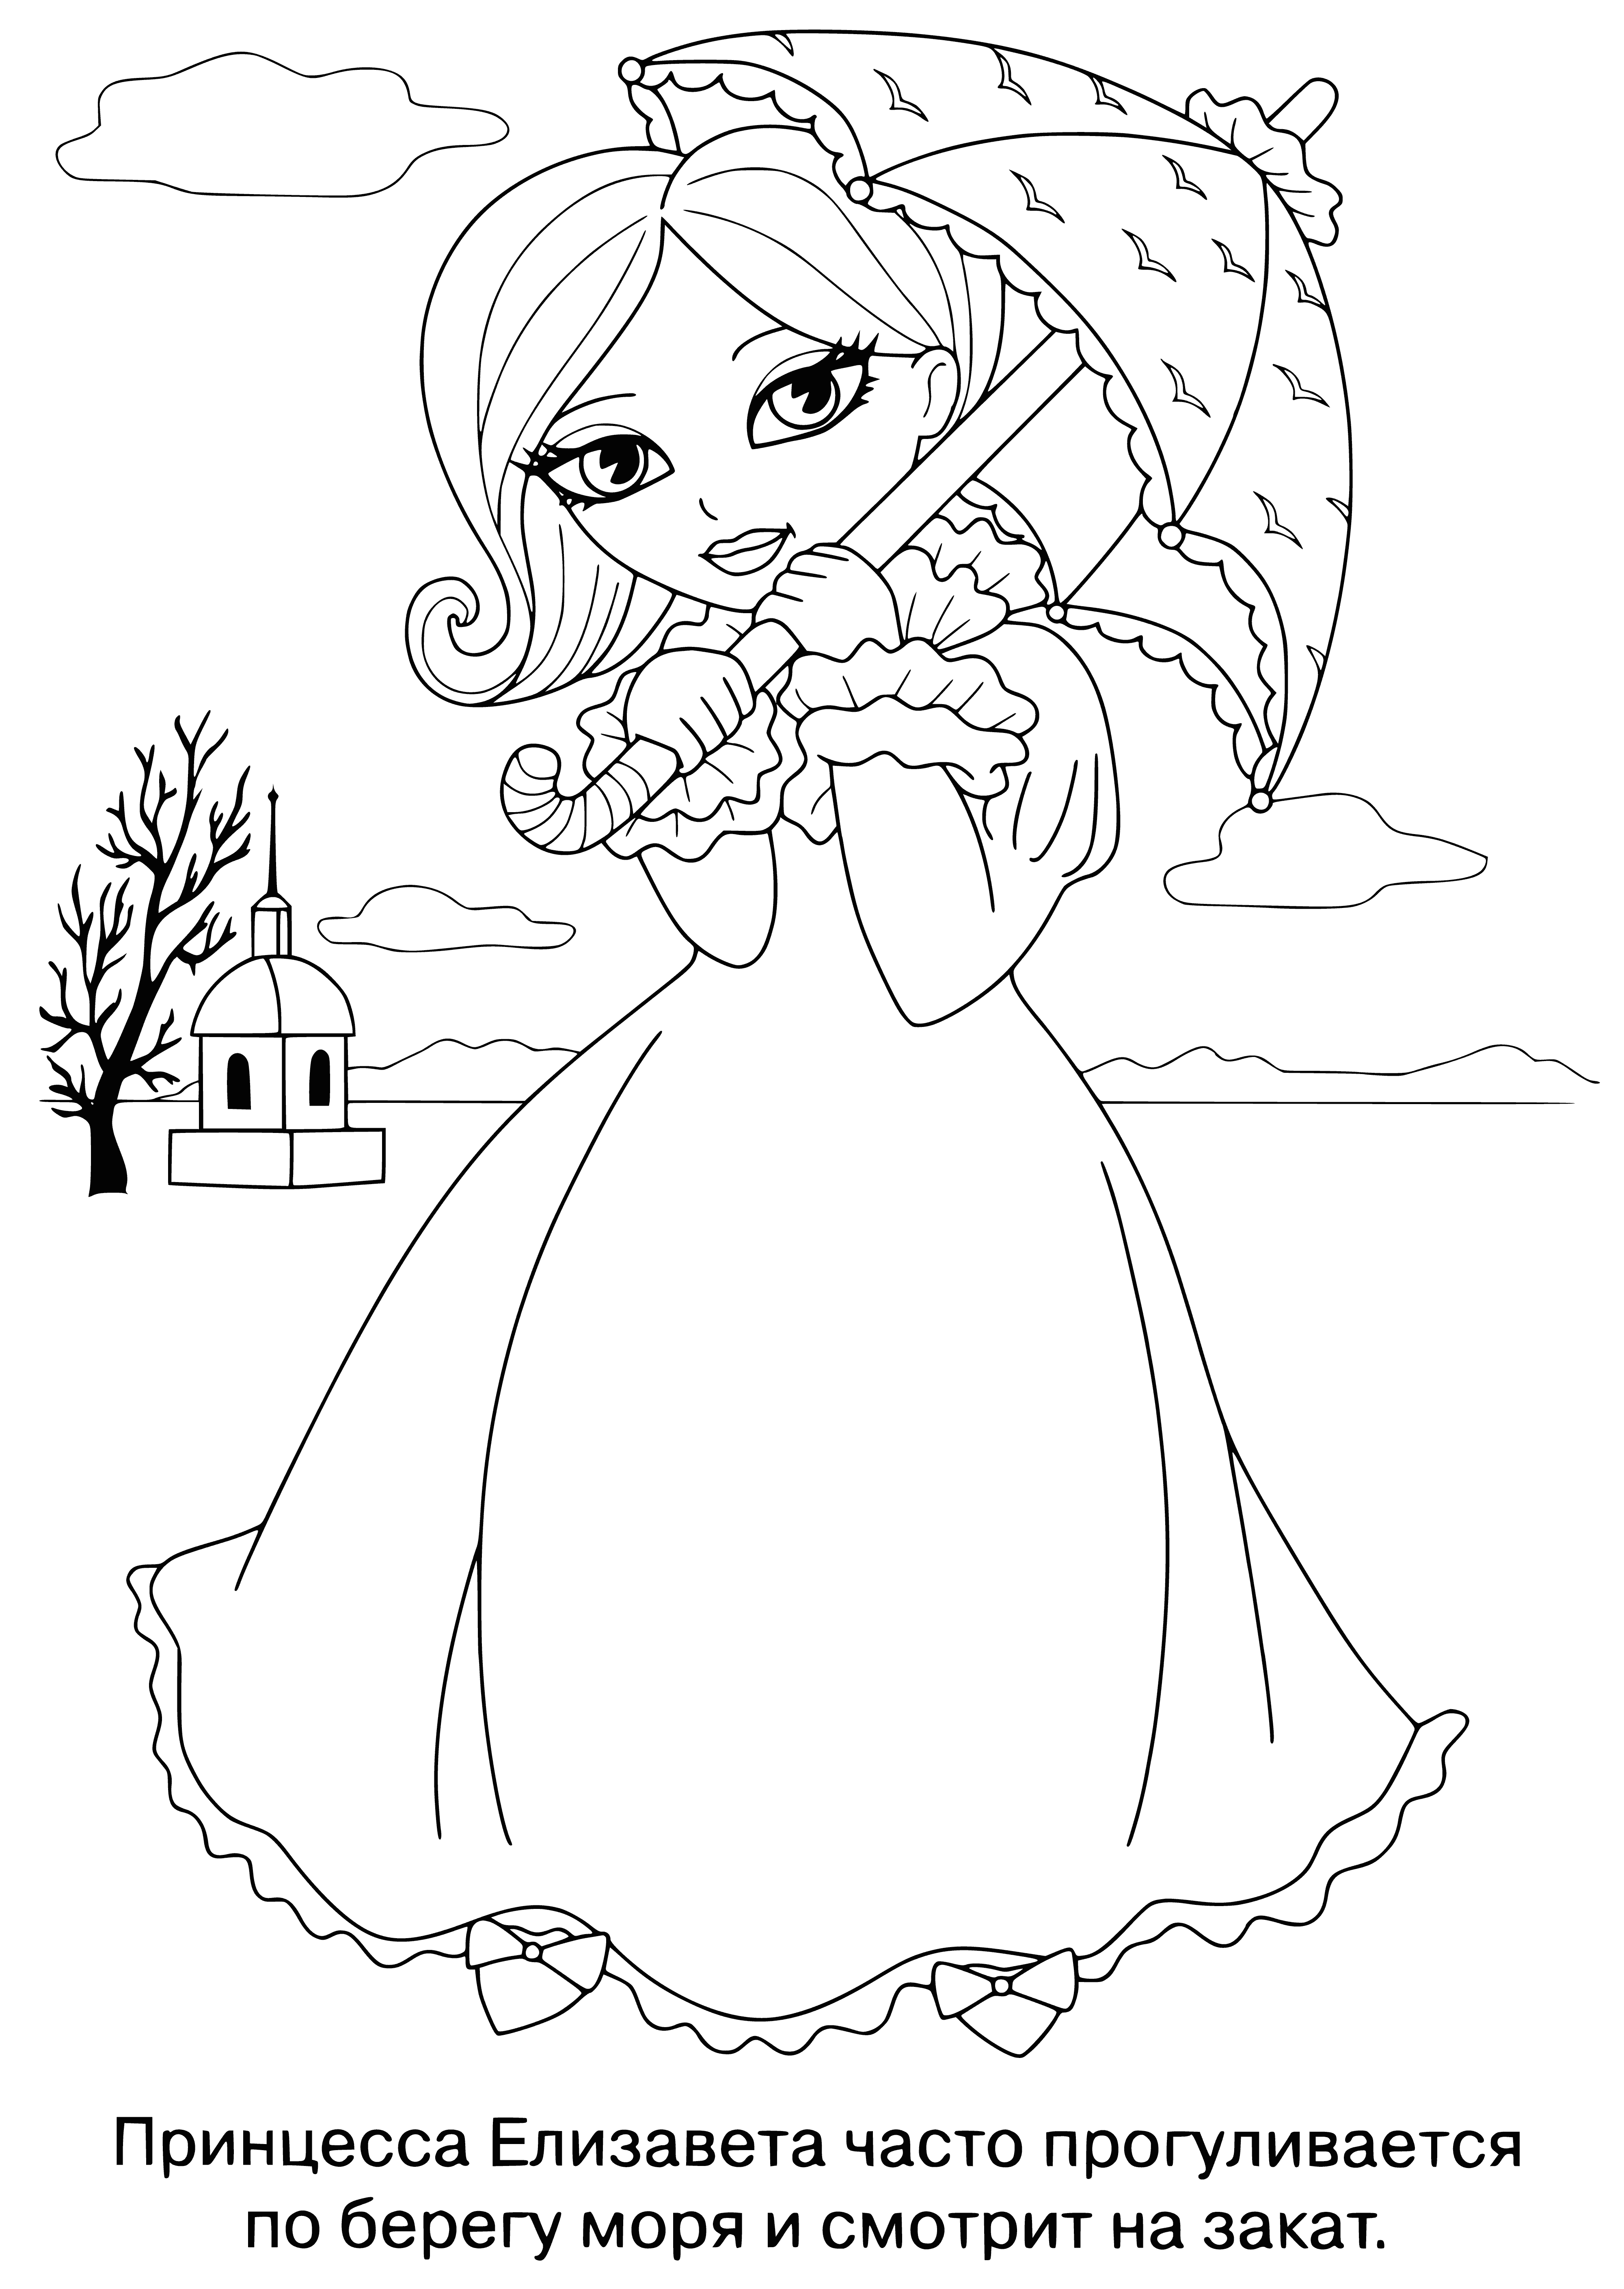 coloring page: Princess Elizabeth stands in a flowery field, with a bird in flight close by. #coloringpages